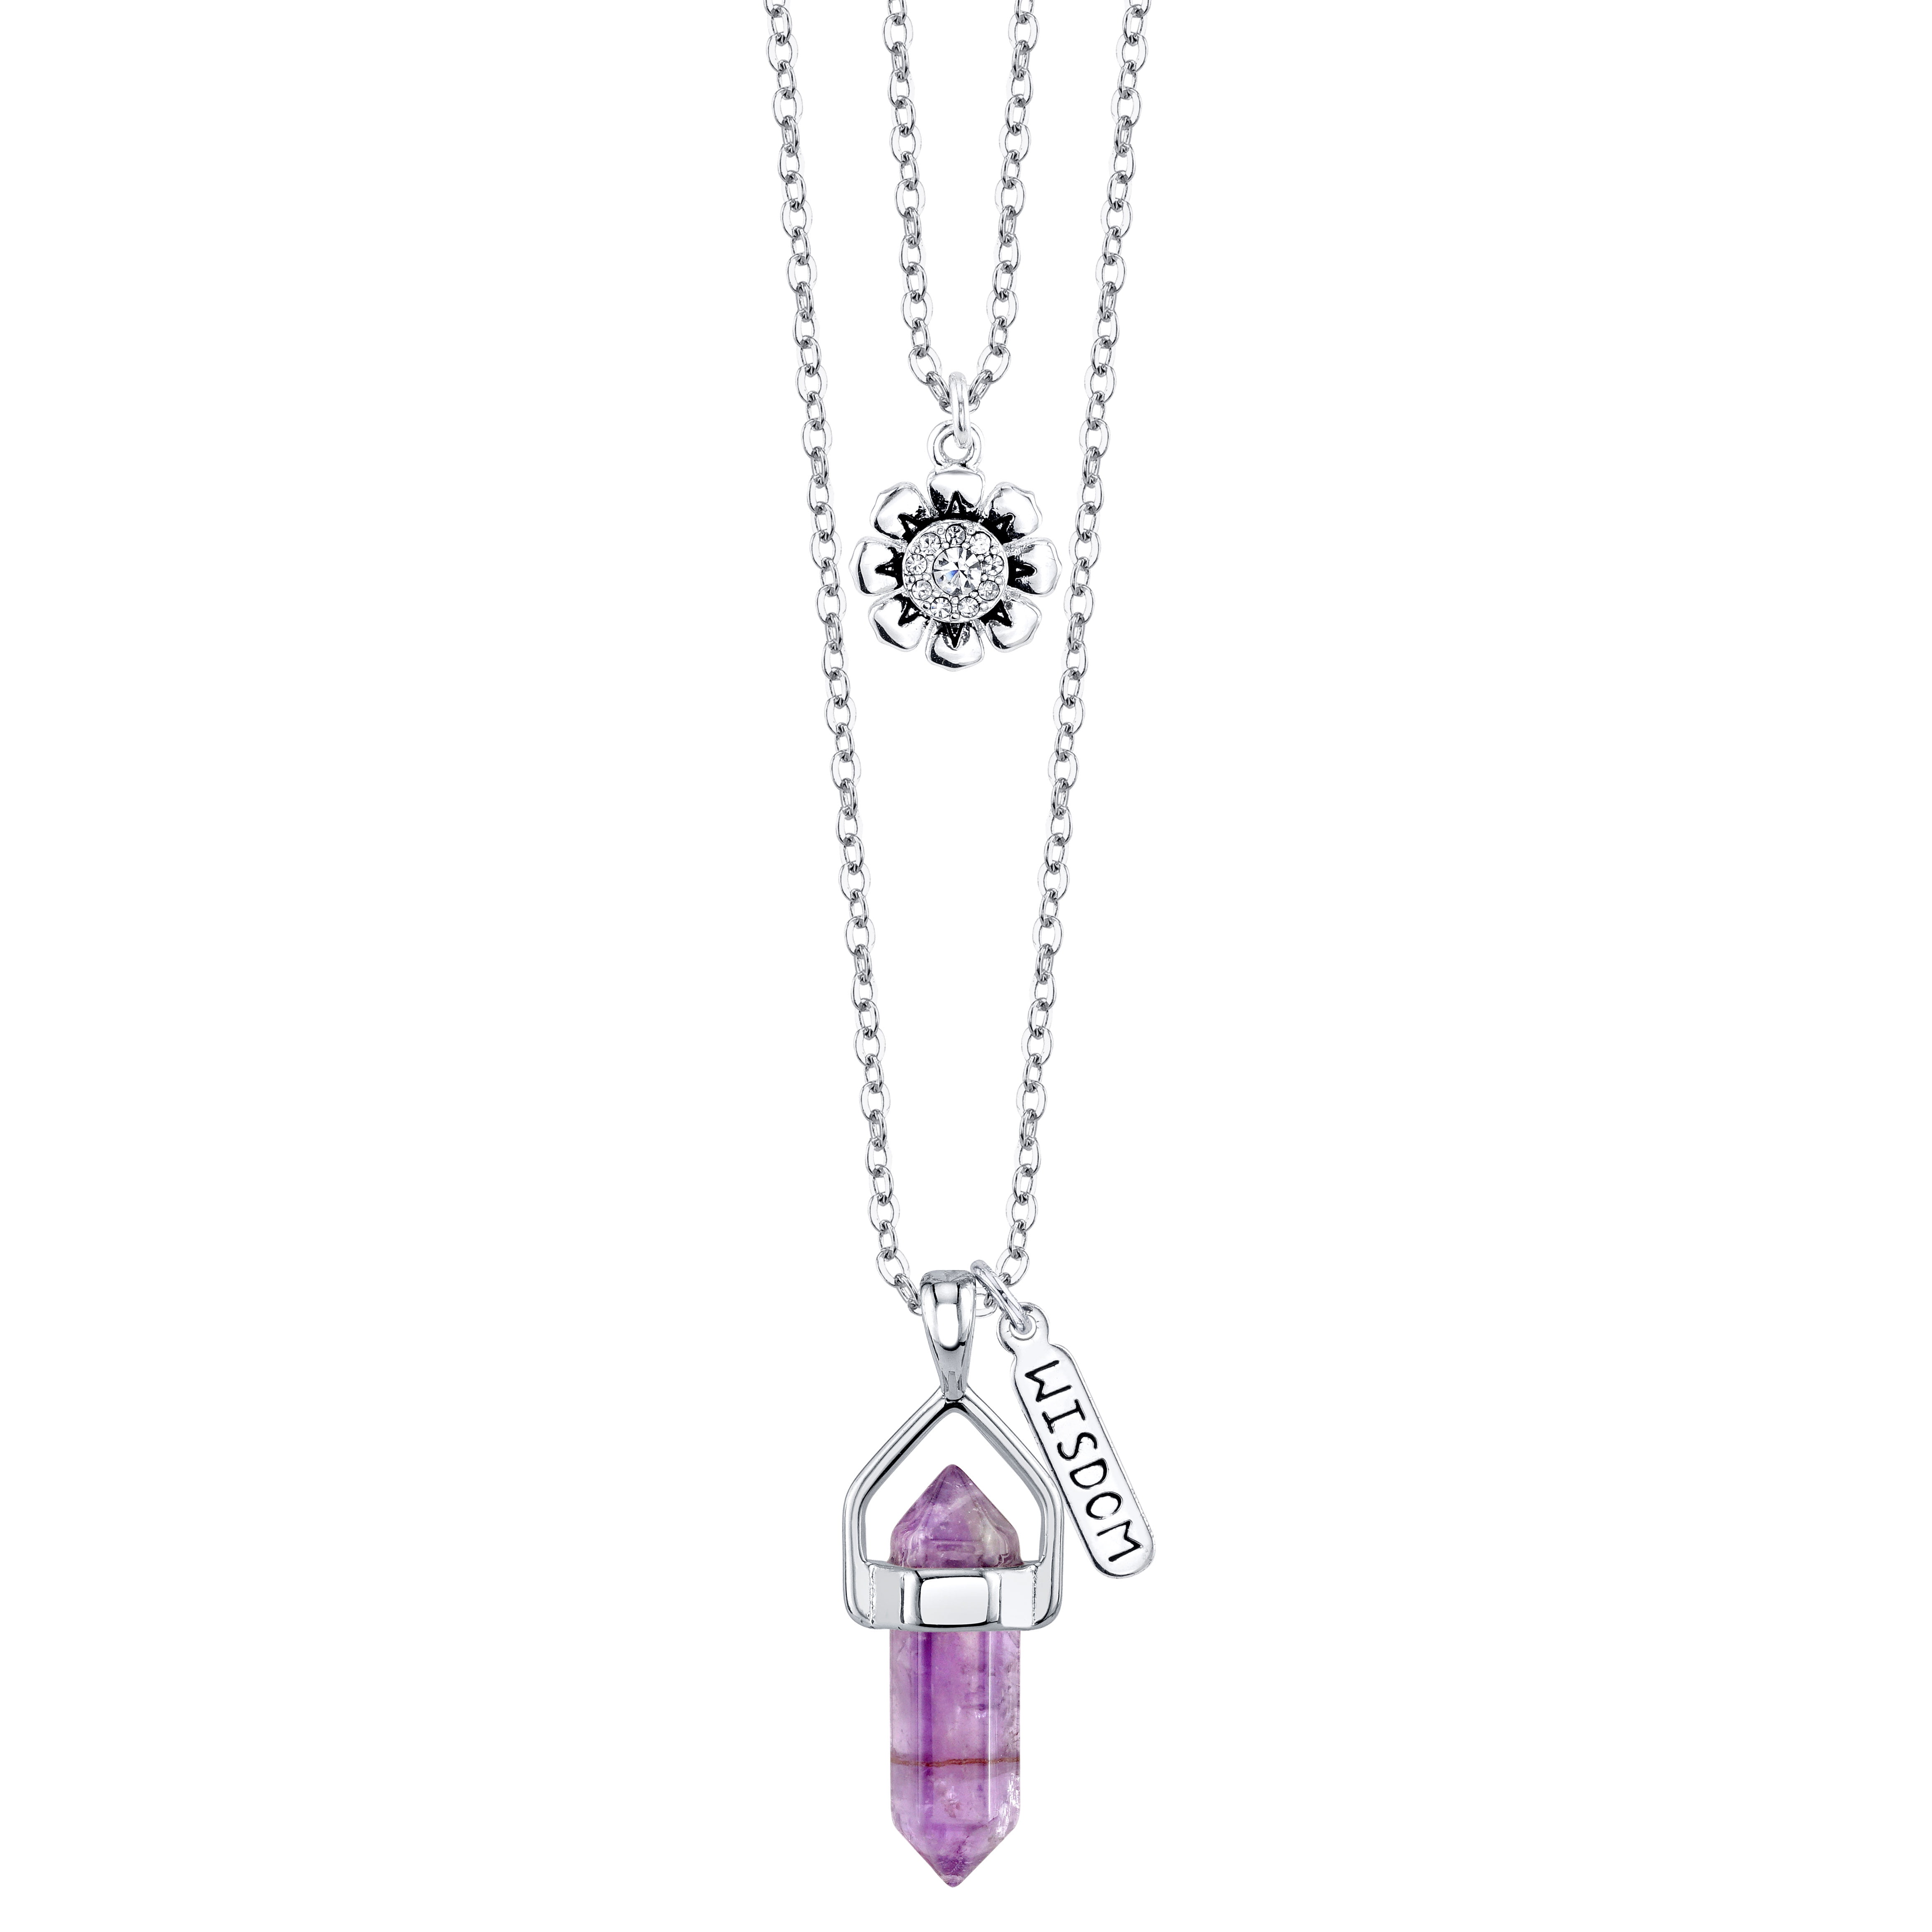 Silver Double Layered Amethyst Necklace, Jewelery, Necklaces, Rings, Lovisa